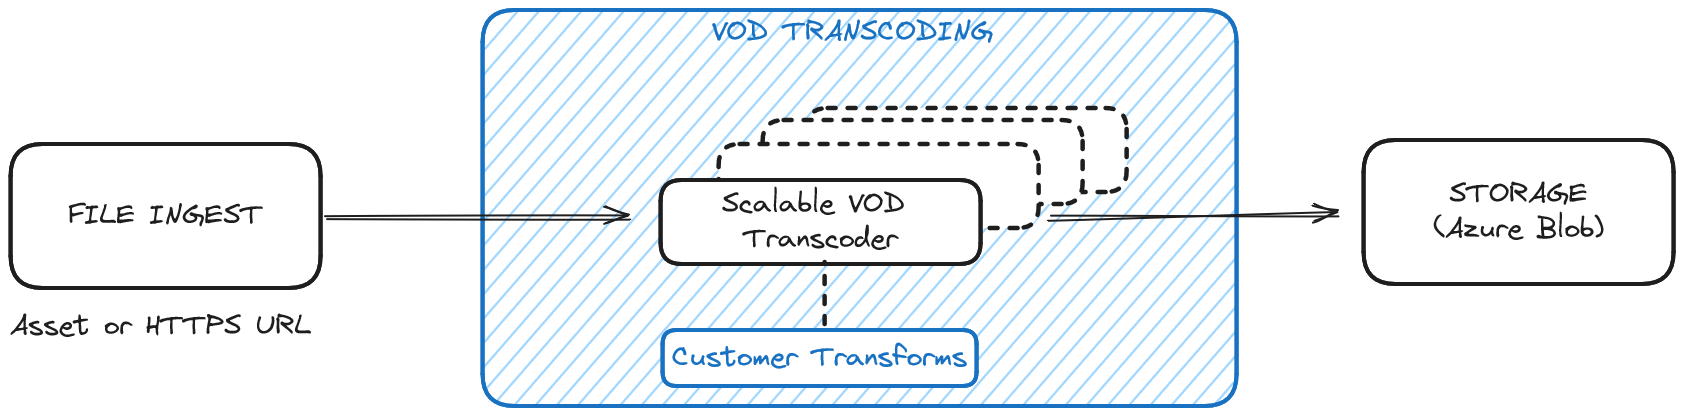 Job with VOD transcoding as transform